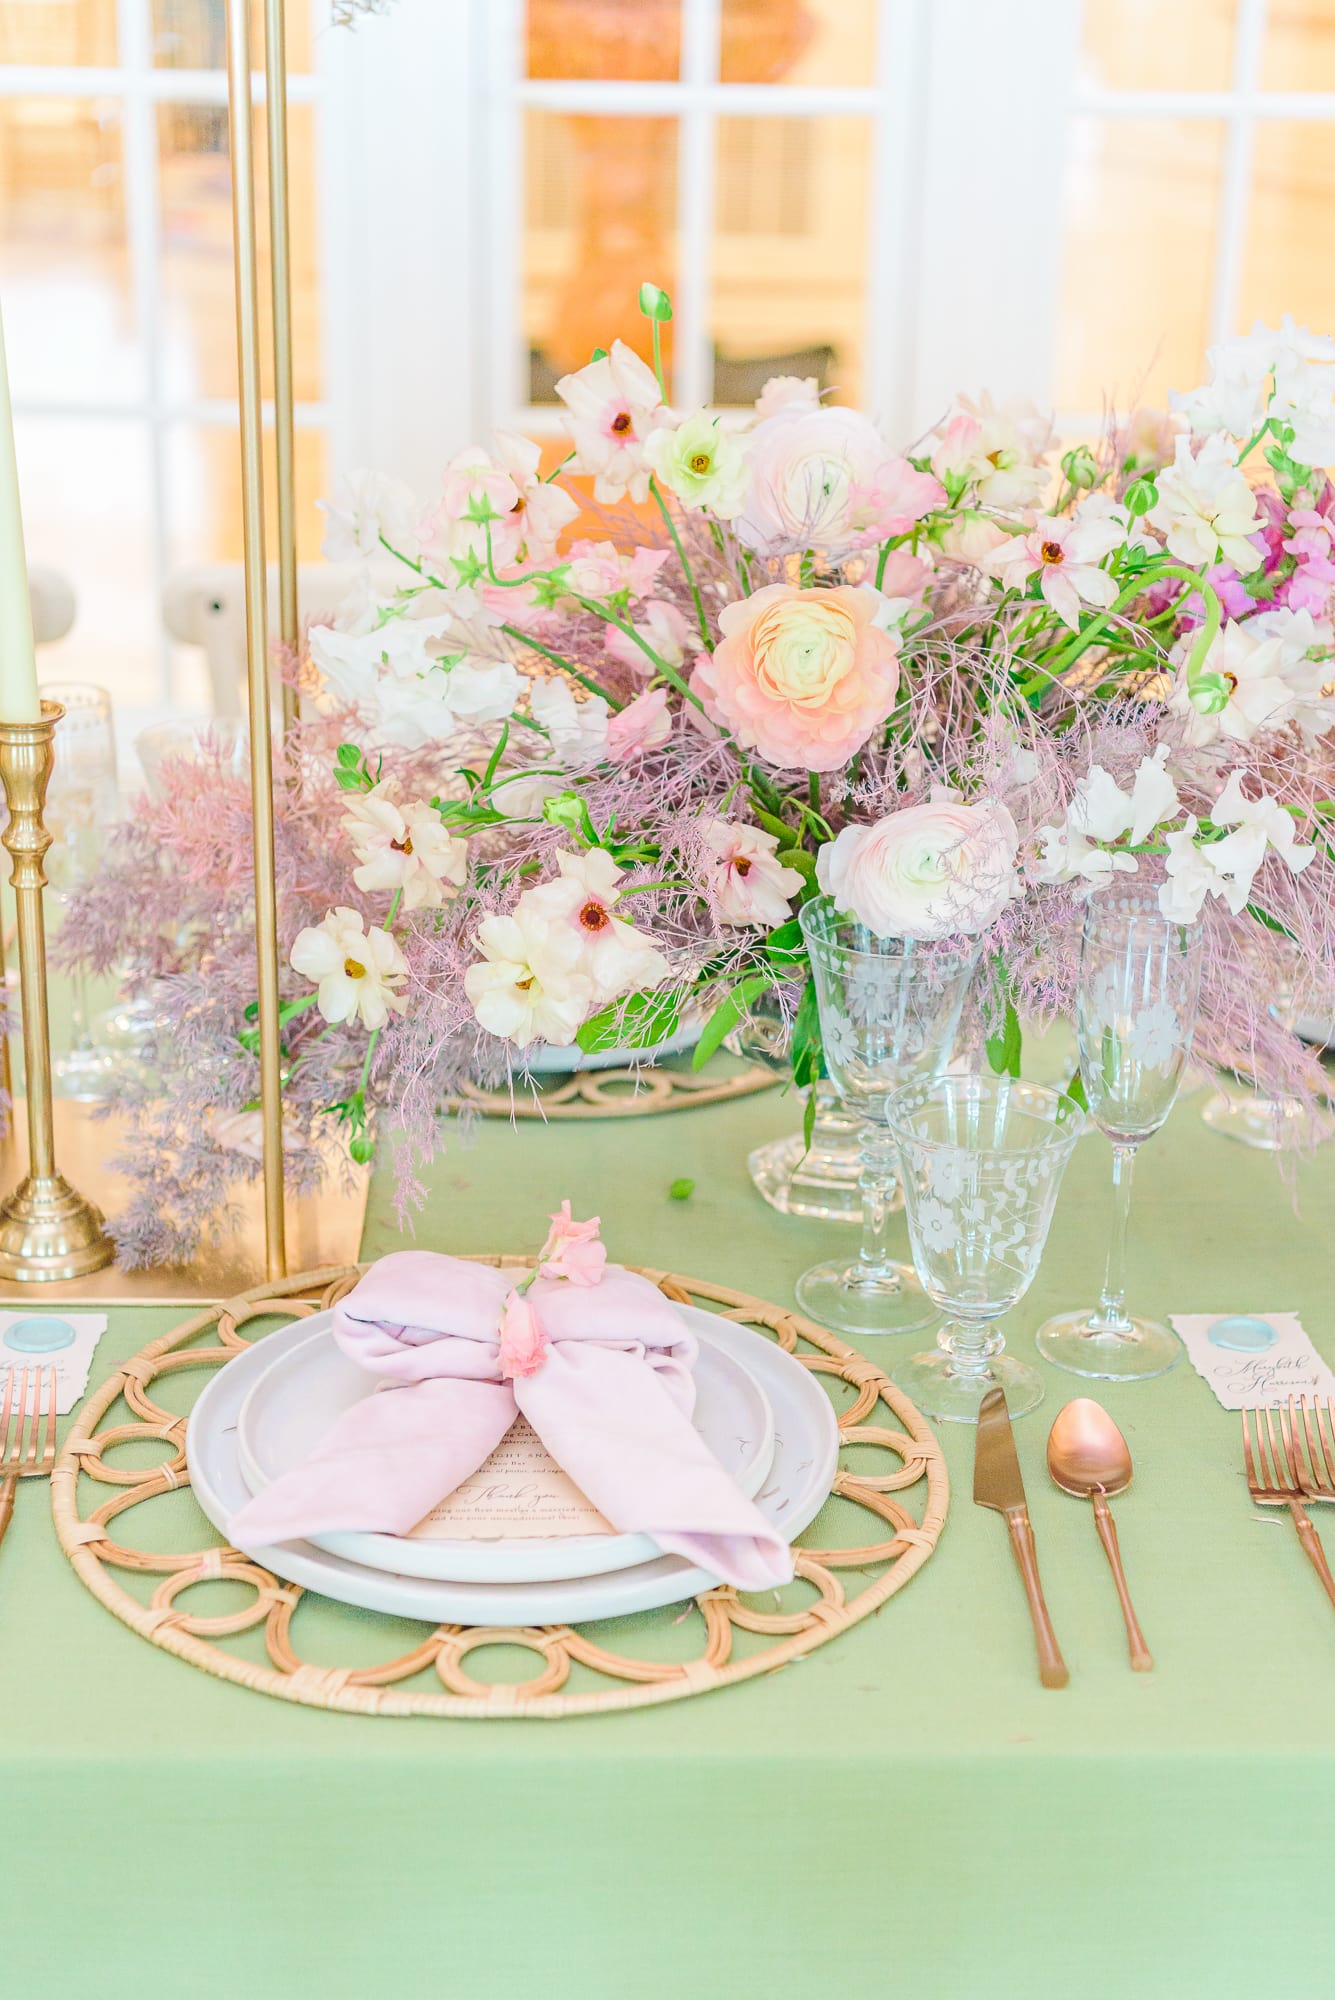 Purple flowers and place settings are designed on green linen at this wedding.